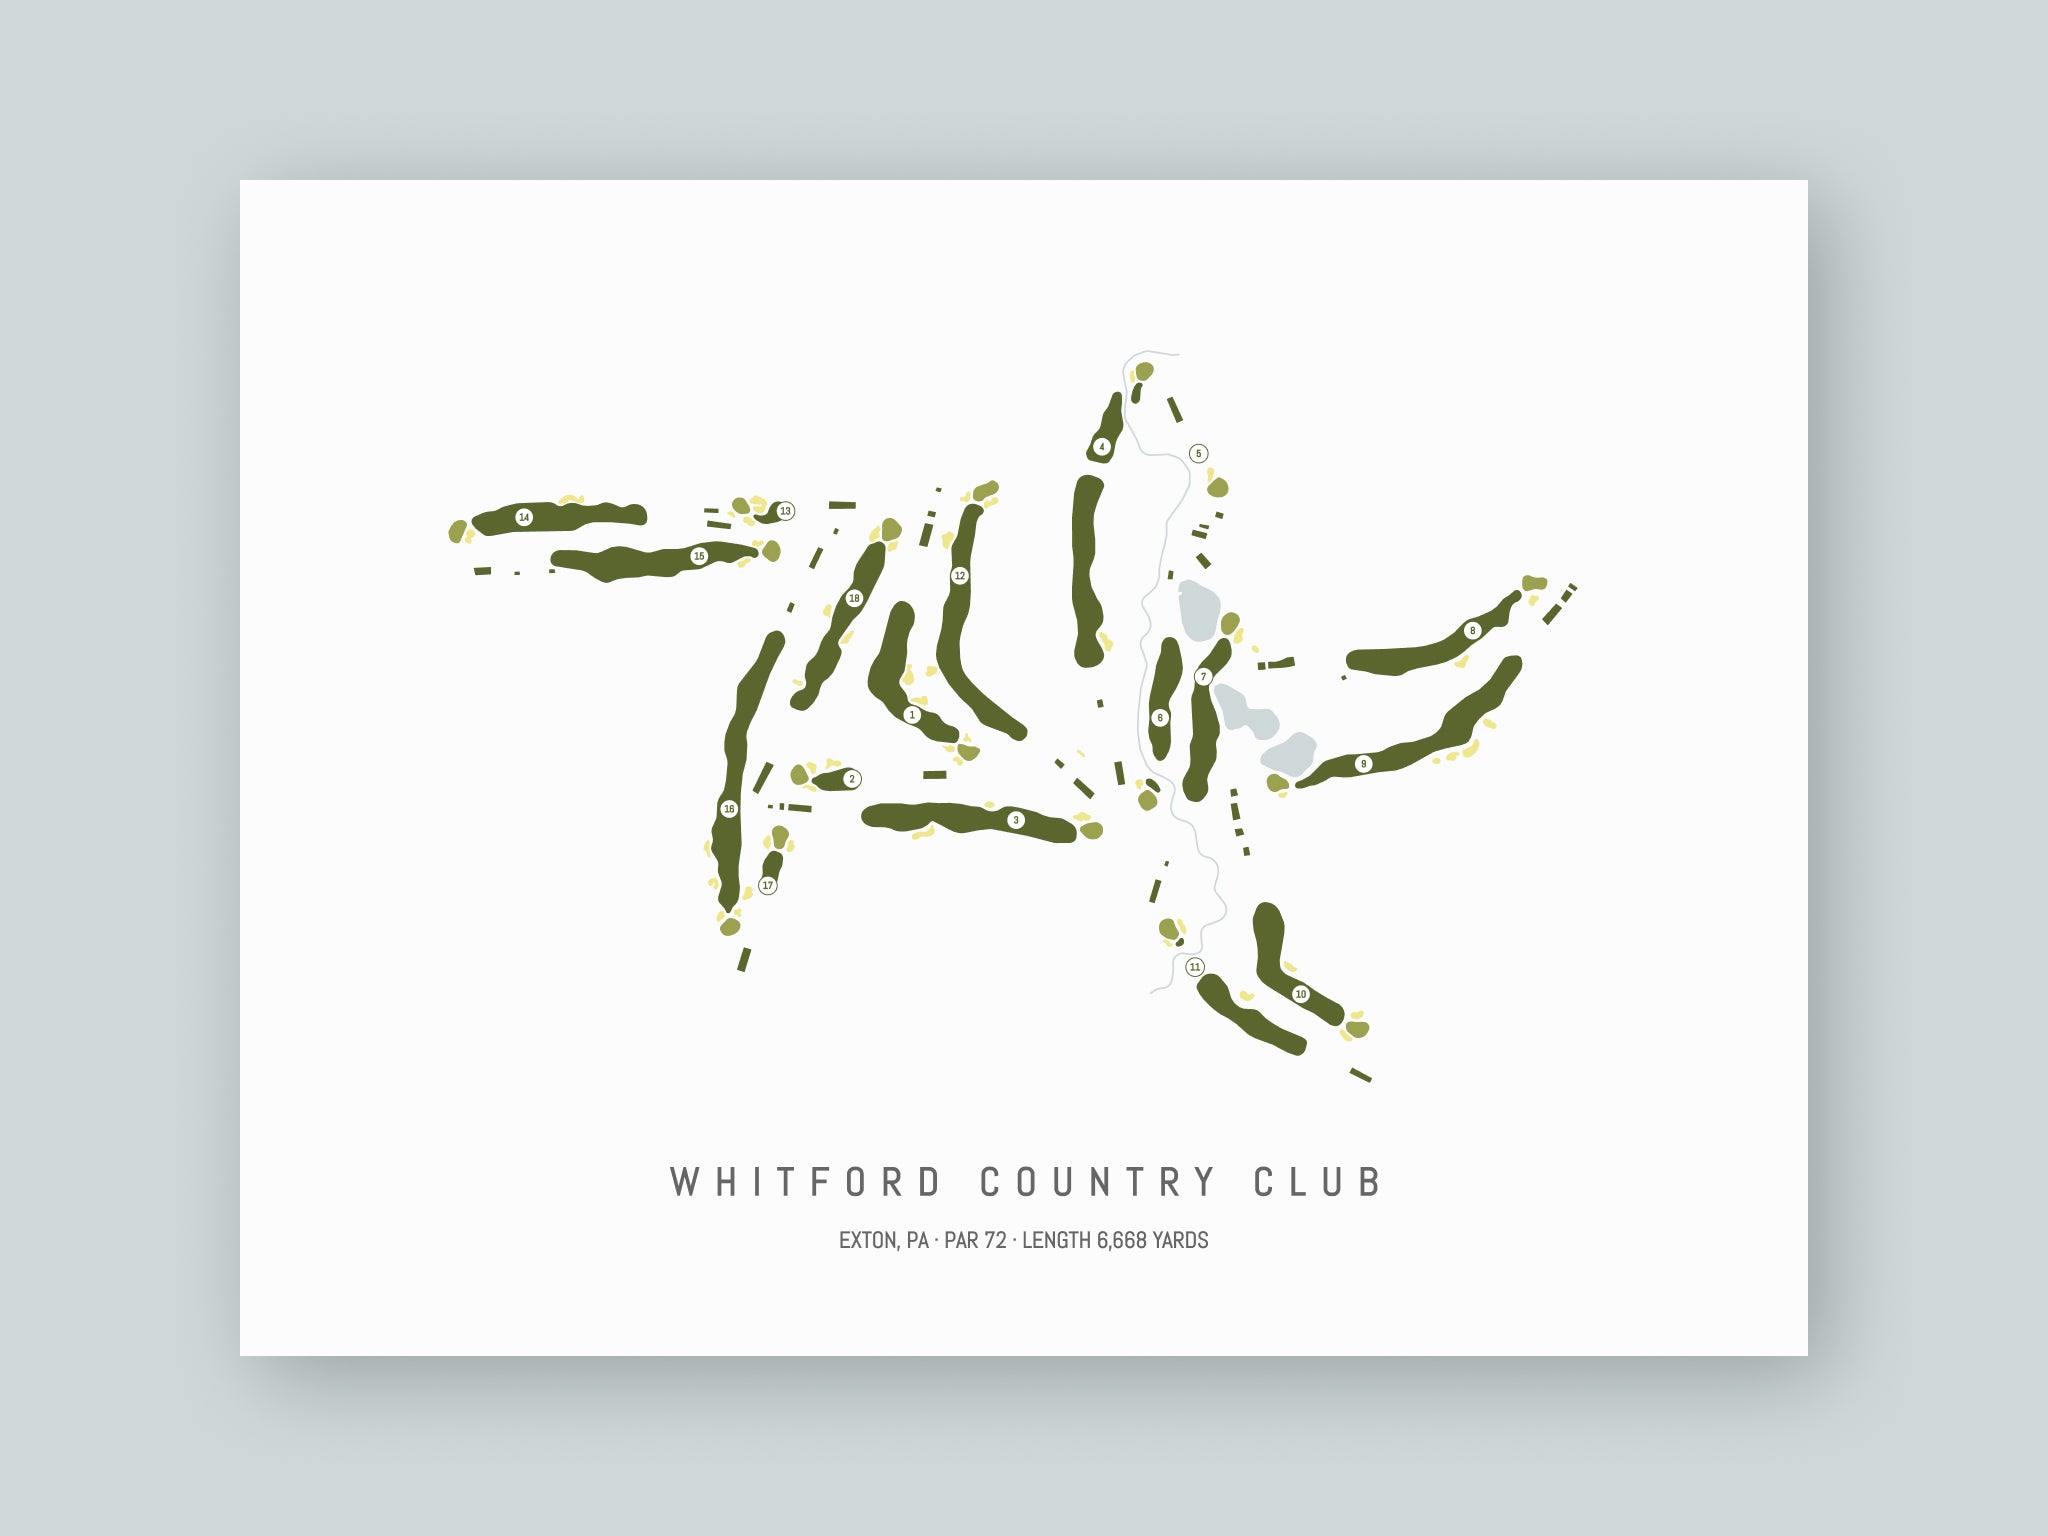 Whitford-Country-Club-PA--Unframed-24x18-With-Hole-Numbers